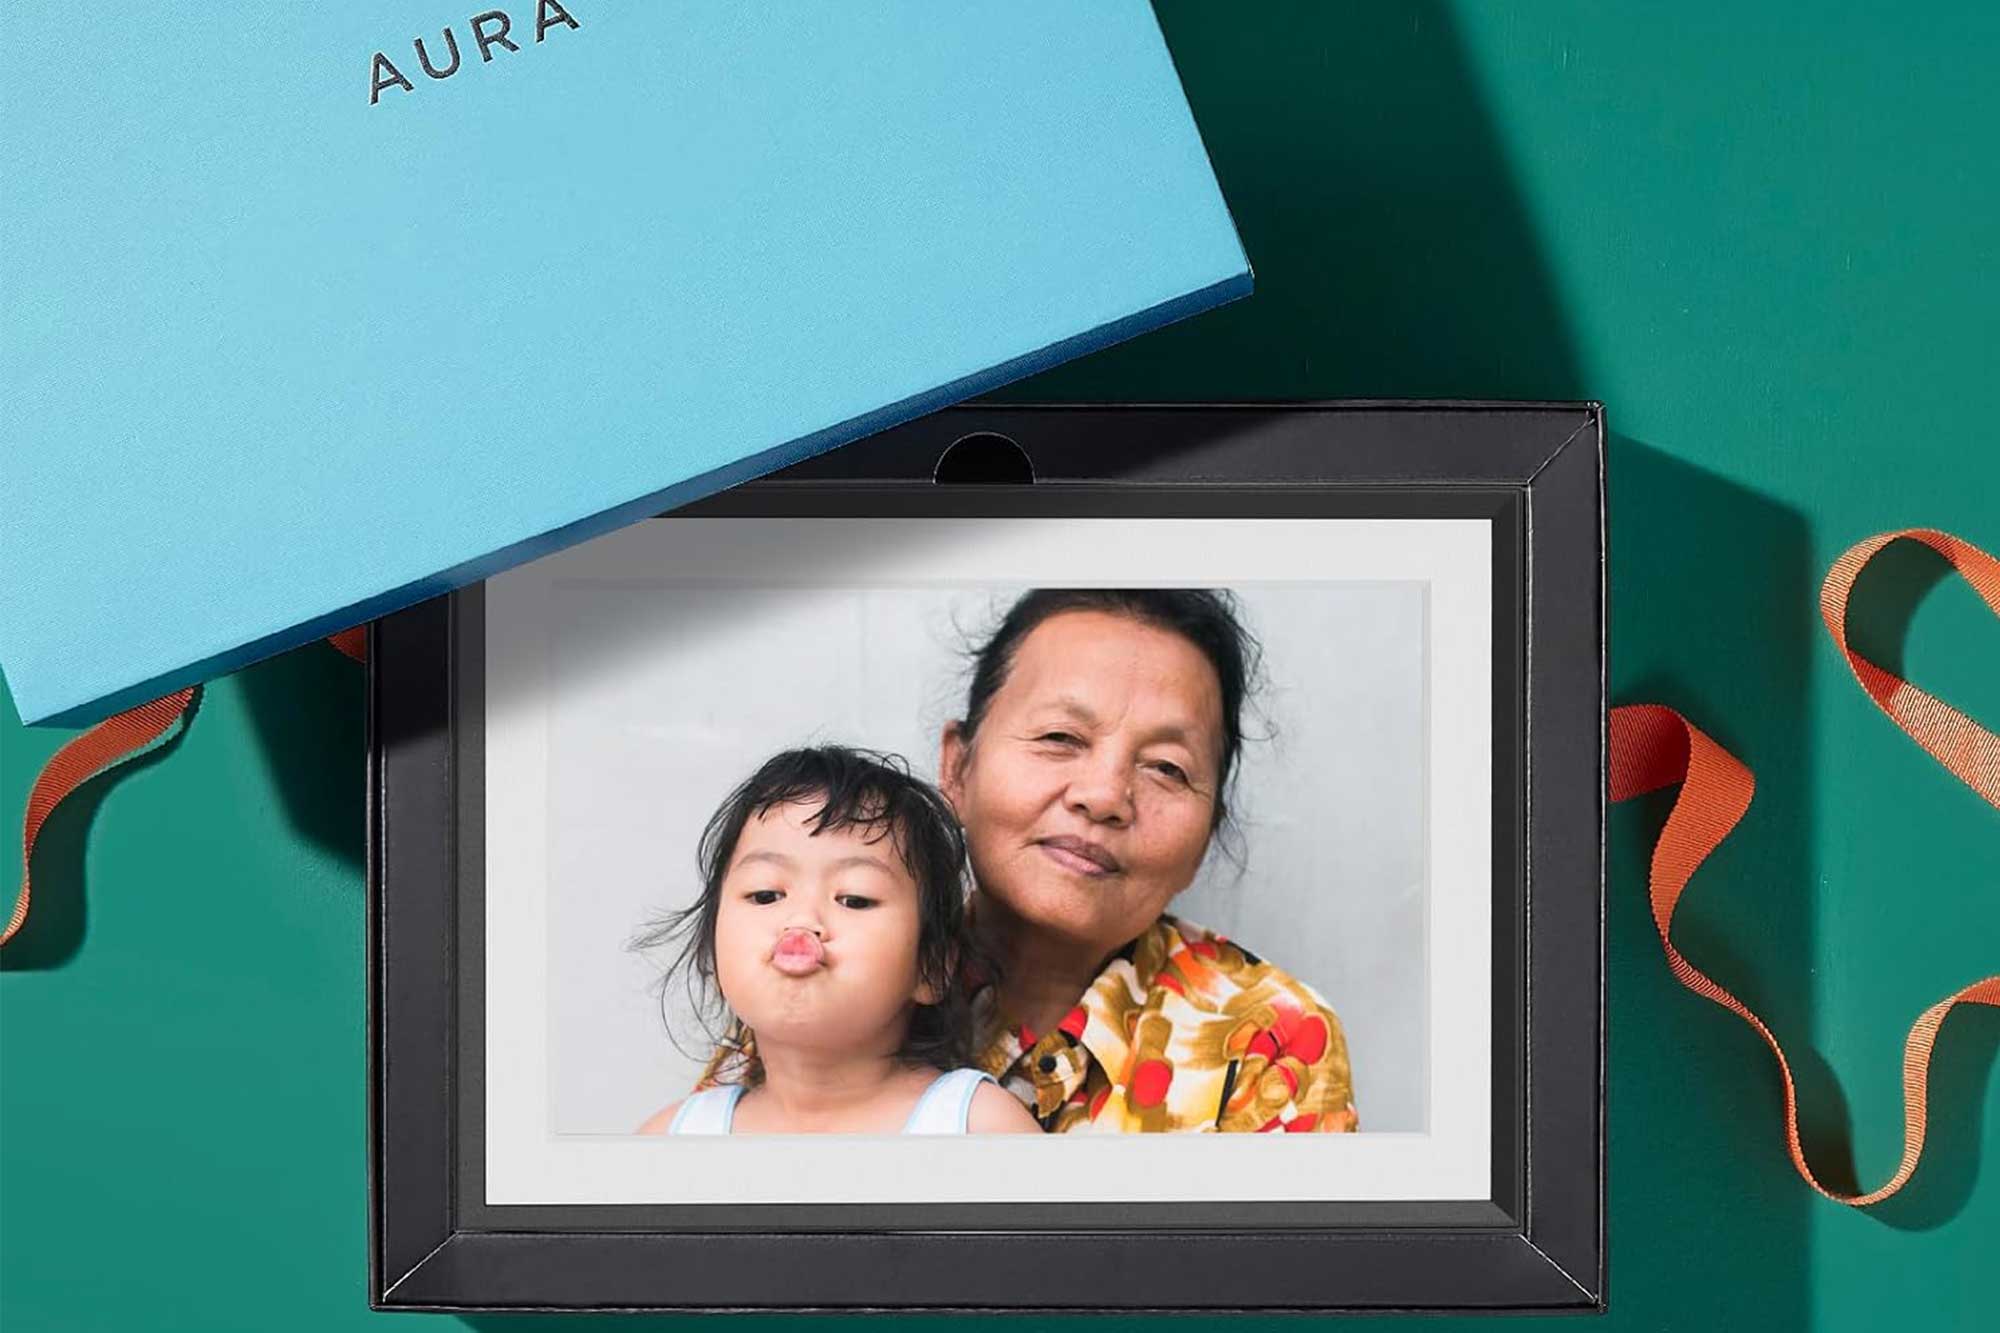 An Aura picture frame near a gift box with a grandma and child displayed on it.